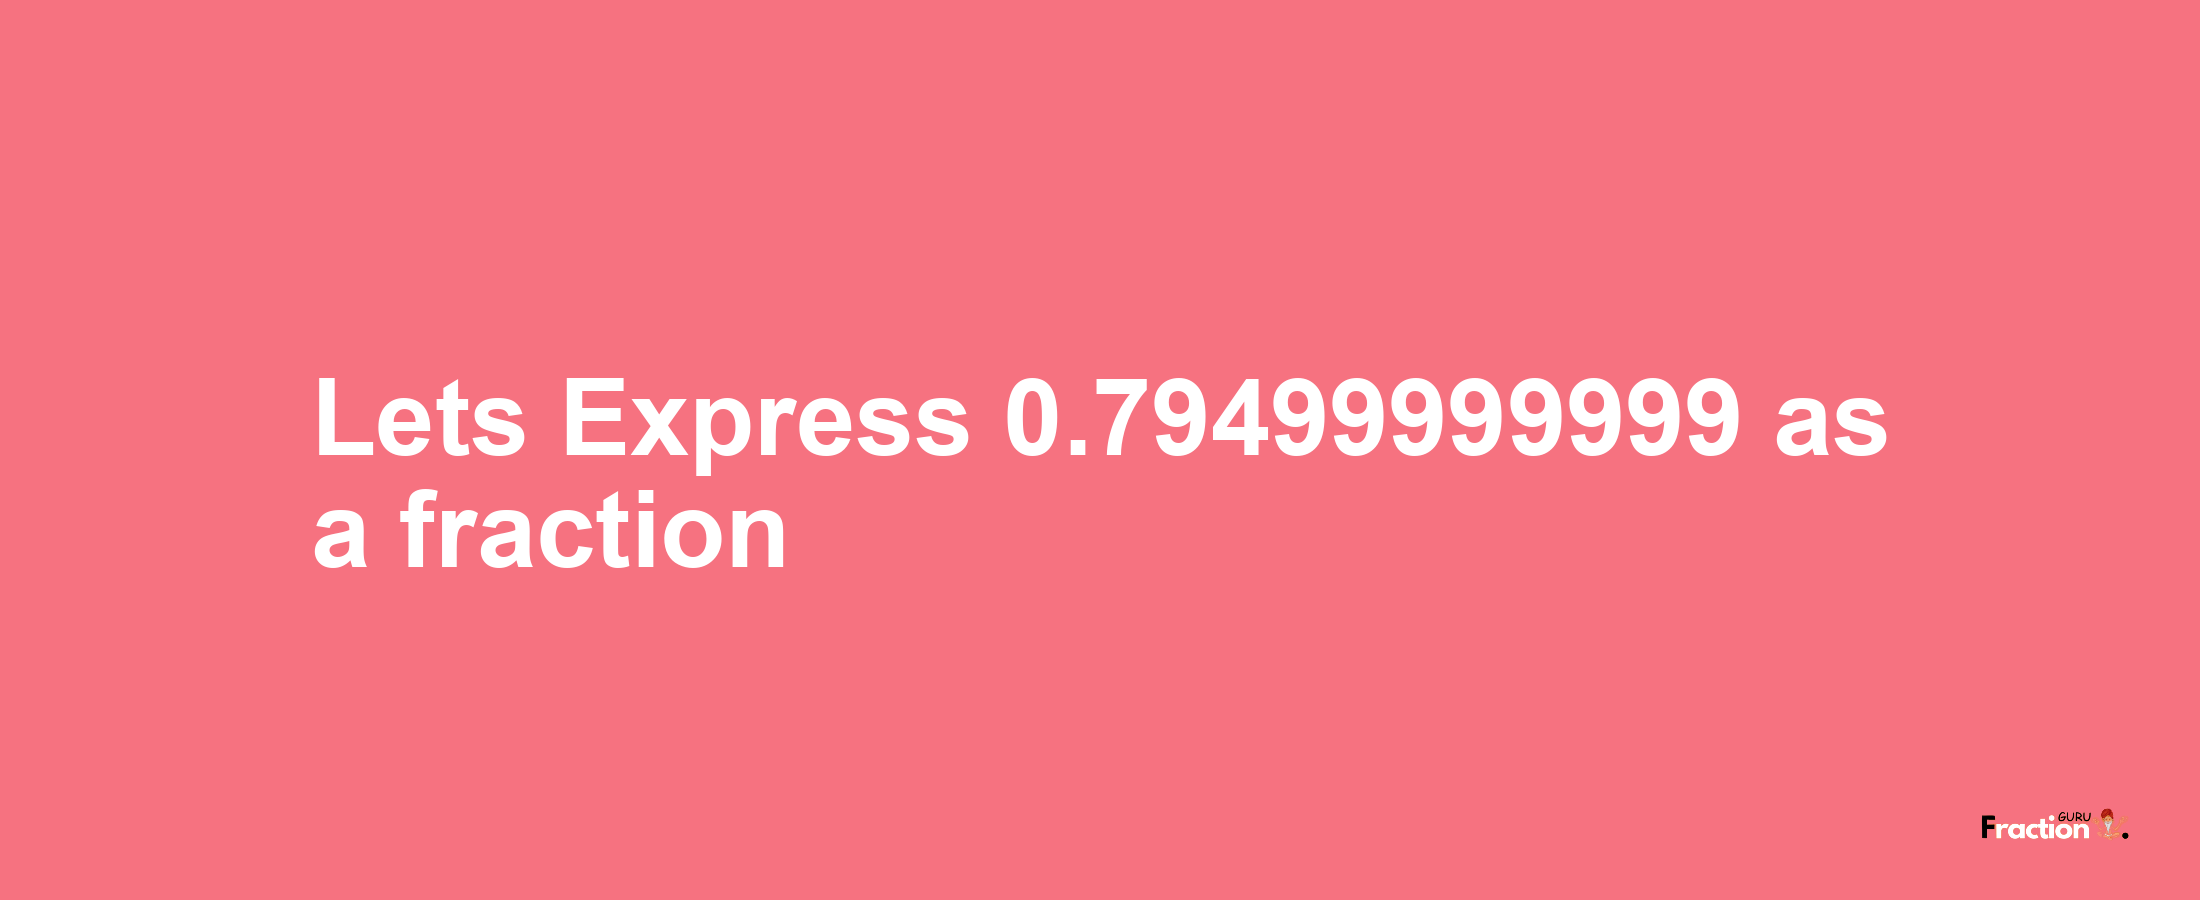 Lets Express 0.79499999999 as afraction